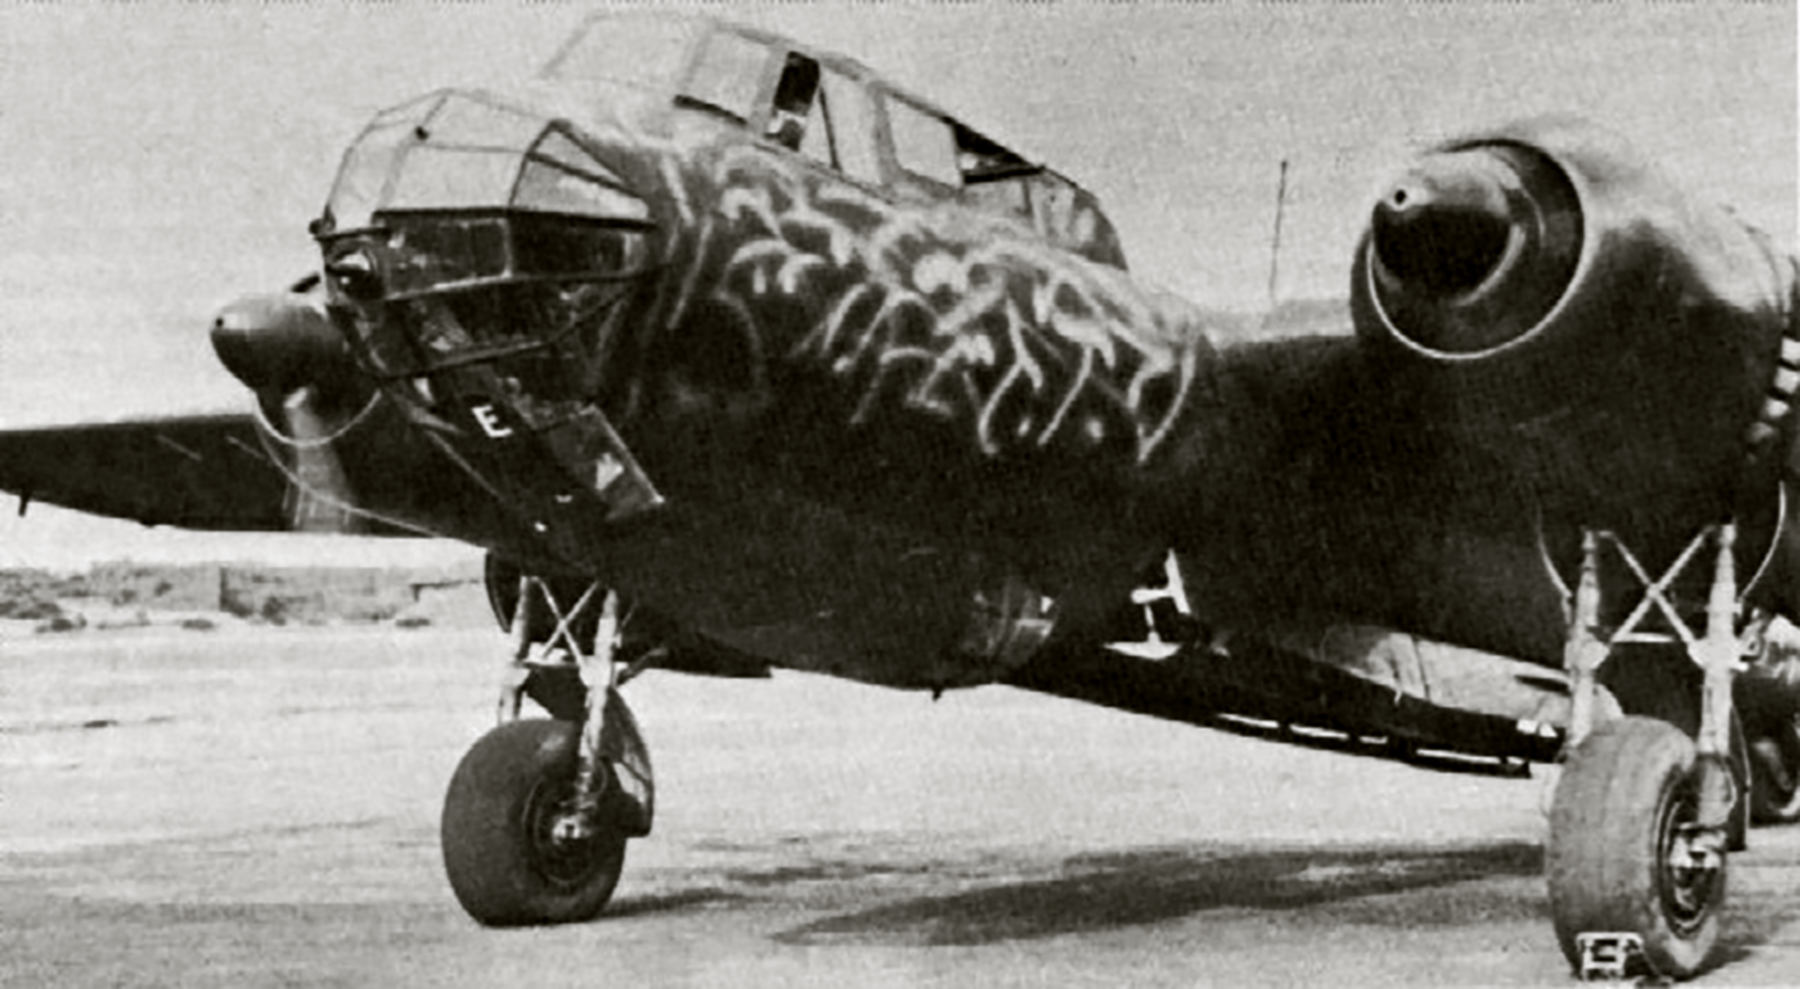 Dornier Do 217E II.KG40 aircraft code E photographed whilst running its engines France 1943 01